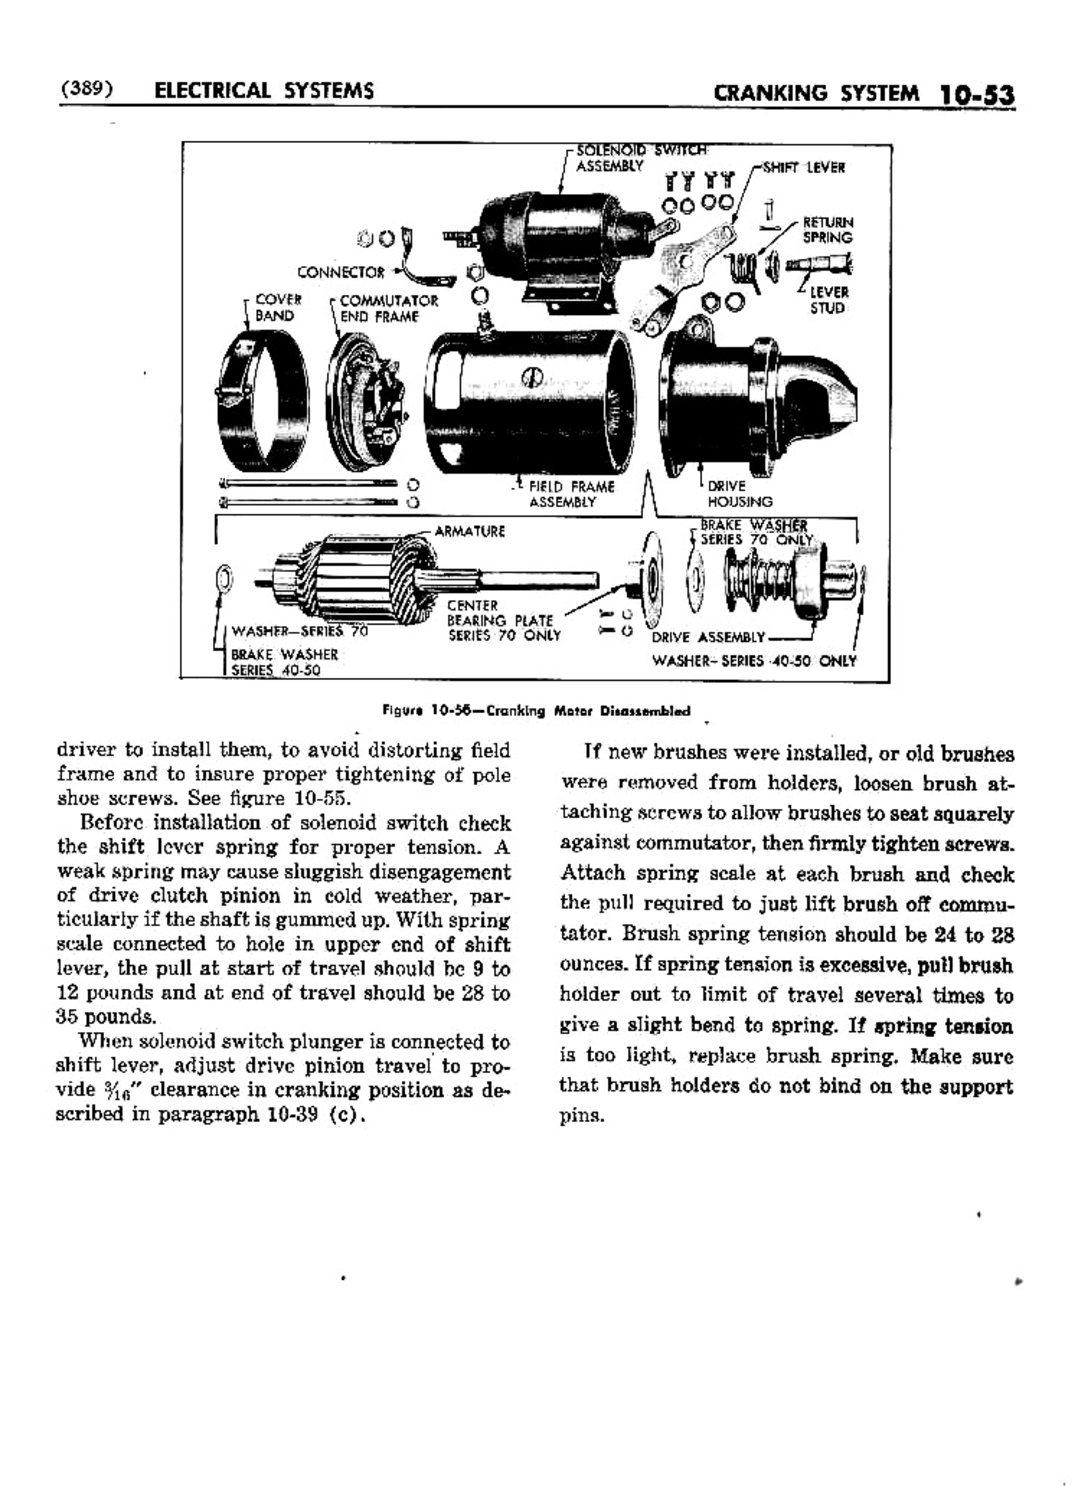 n_11 1952 Buick Shop Manual - Electrical Systems-053-053.jpg